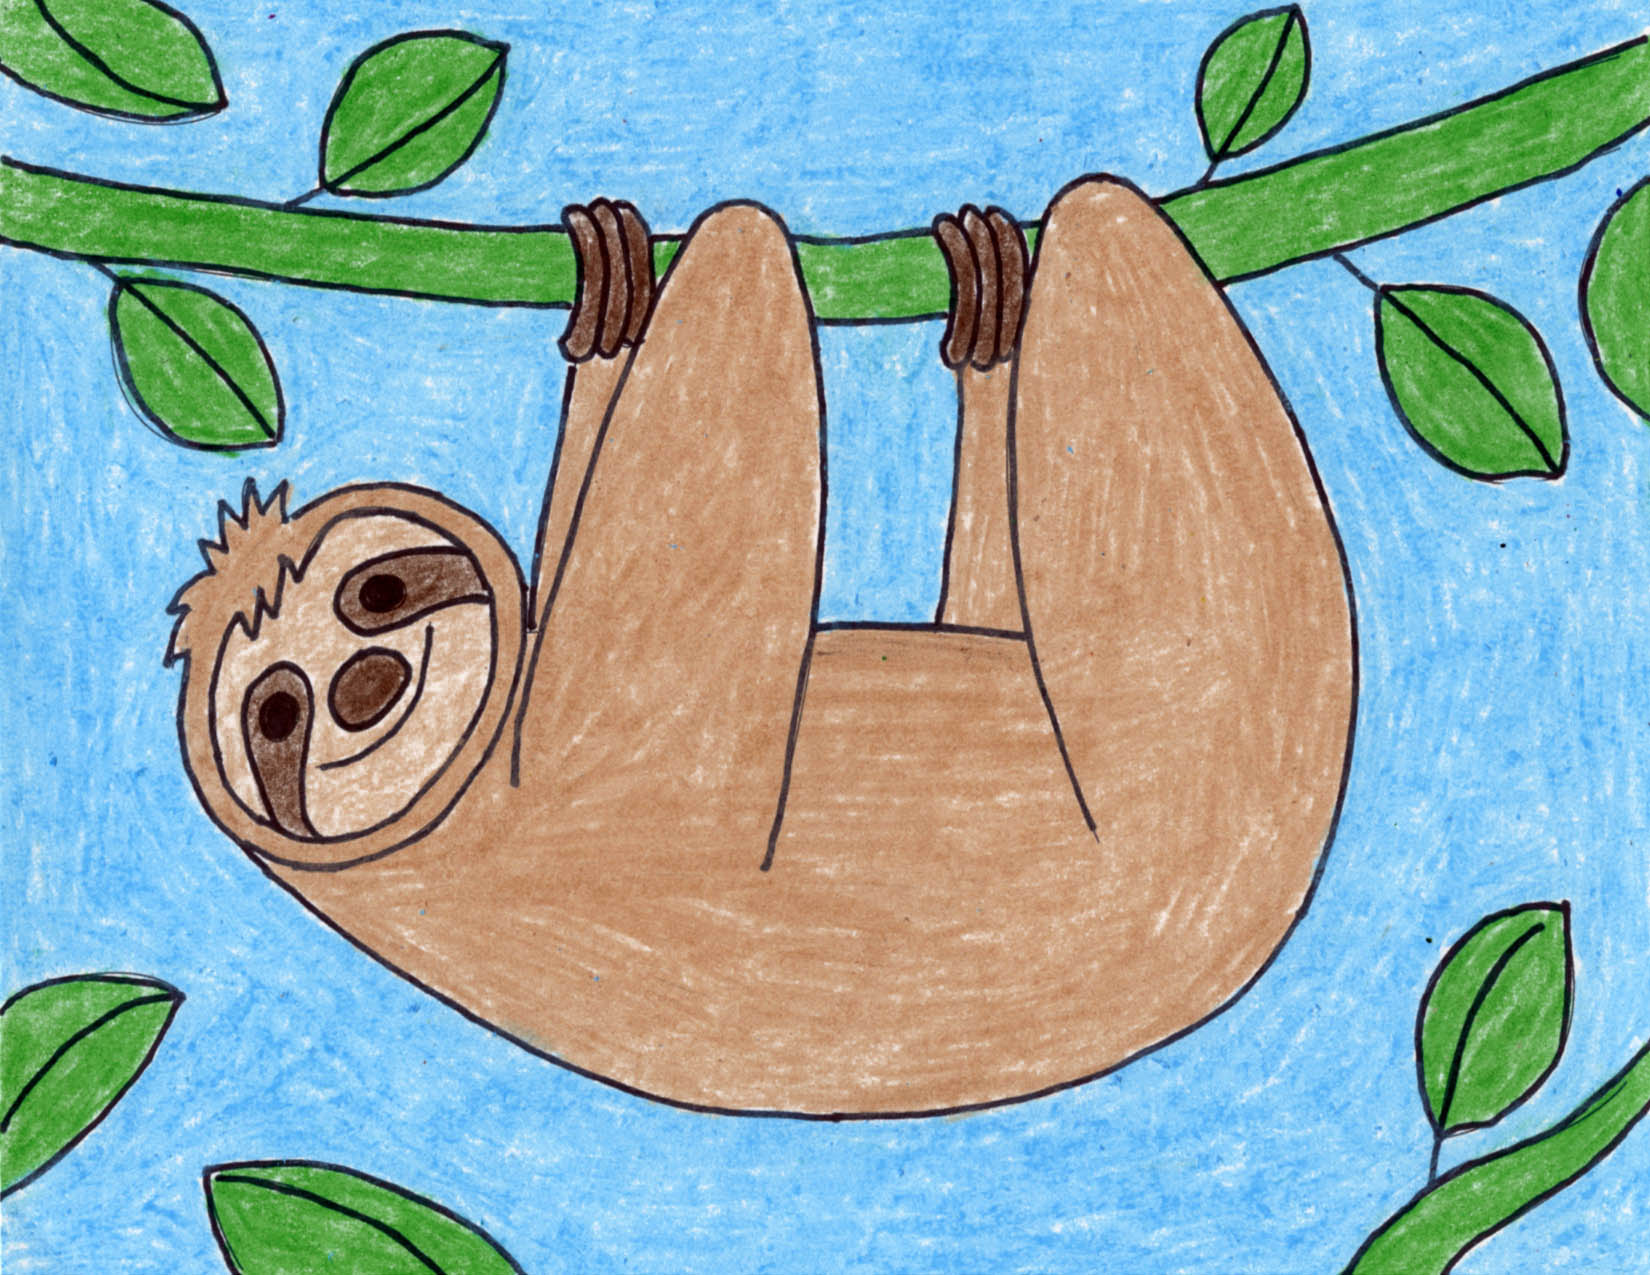 Easy How to Draw a Sloth Tutorial and Sloth Coloring Page